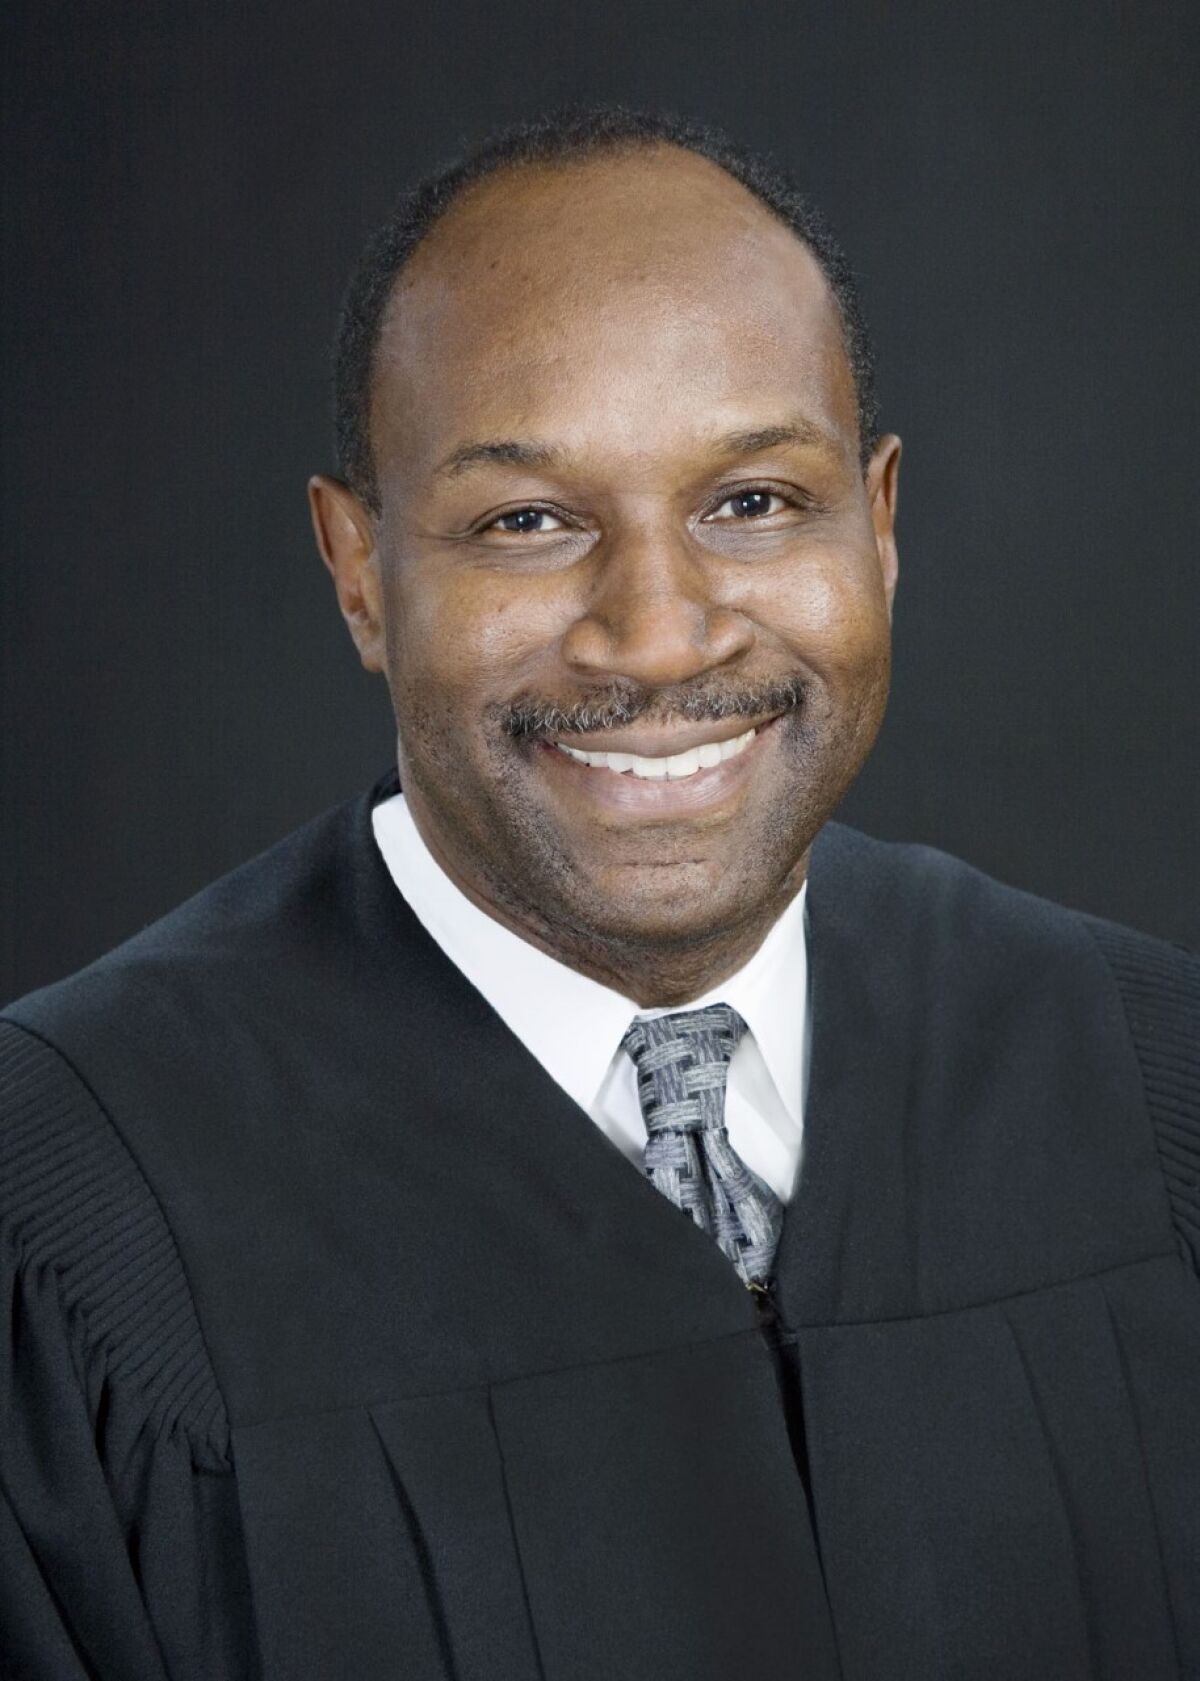 Martin Jenkins was appointed to a seat on the California Supreme Court.